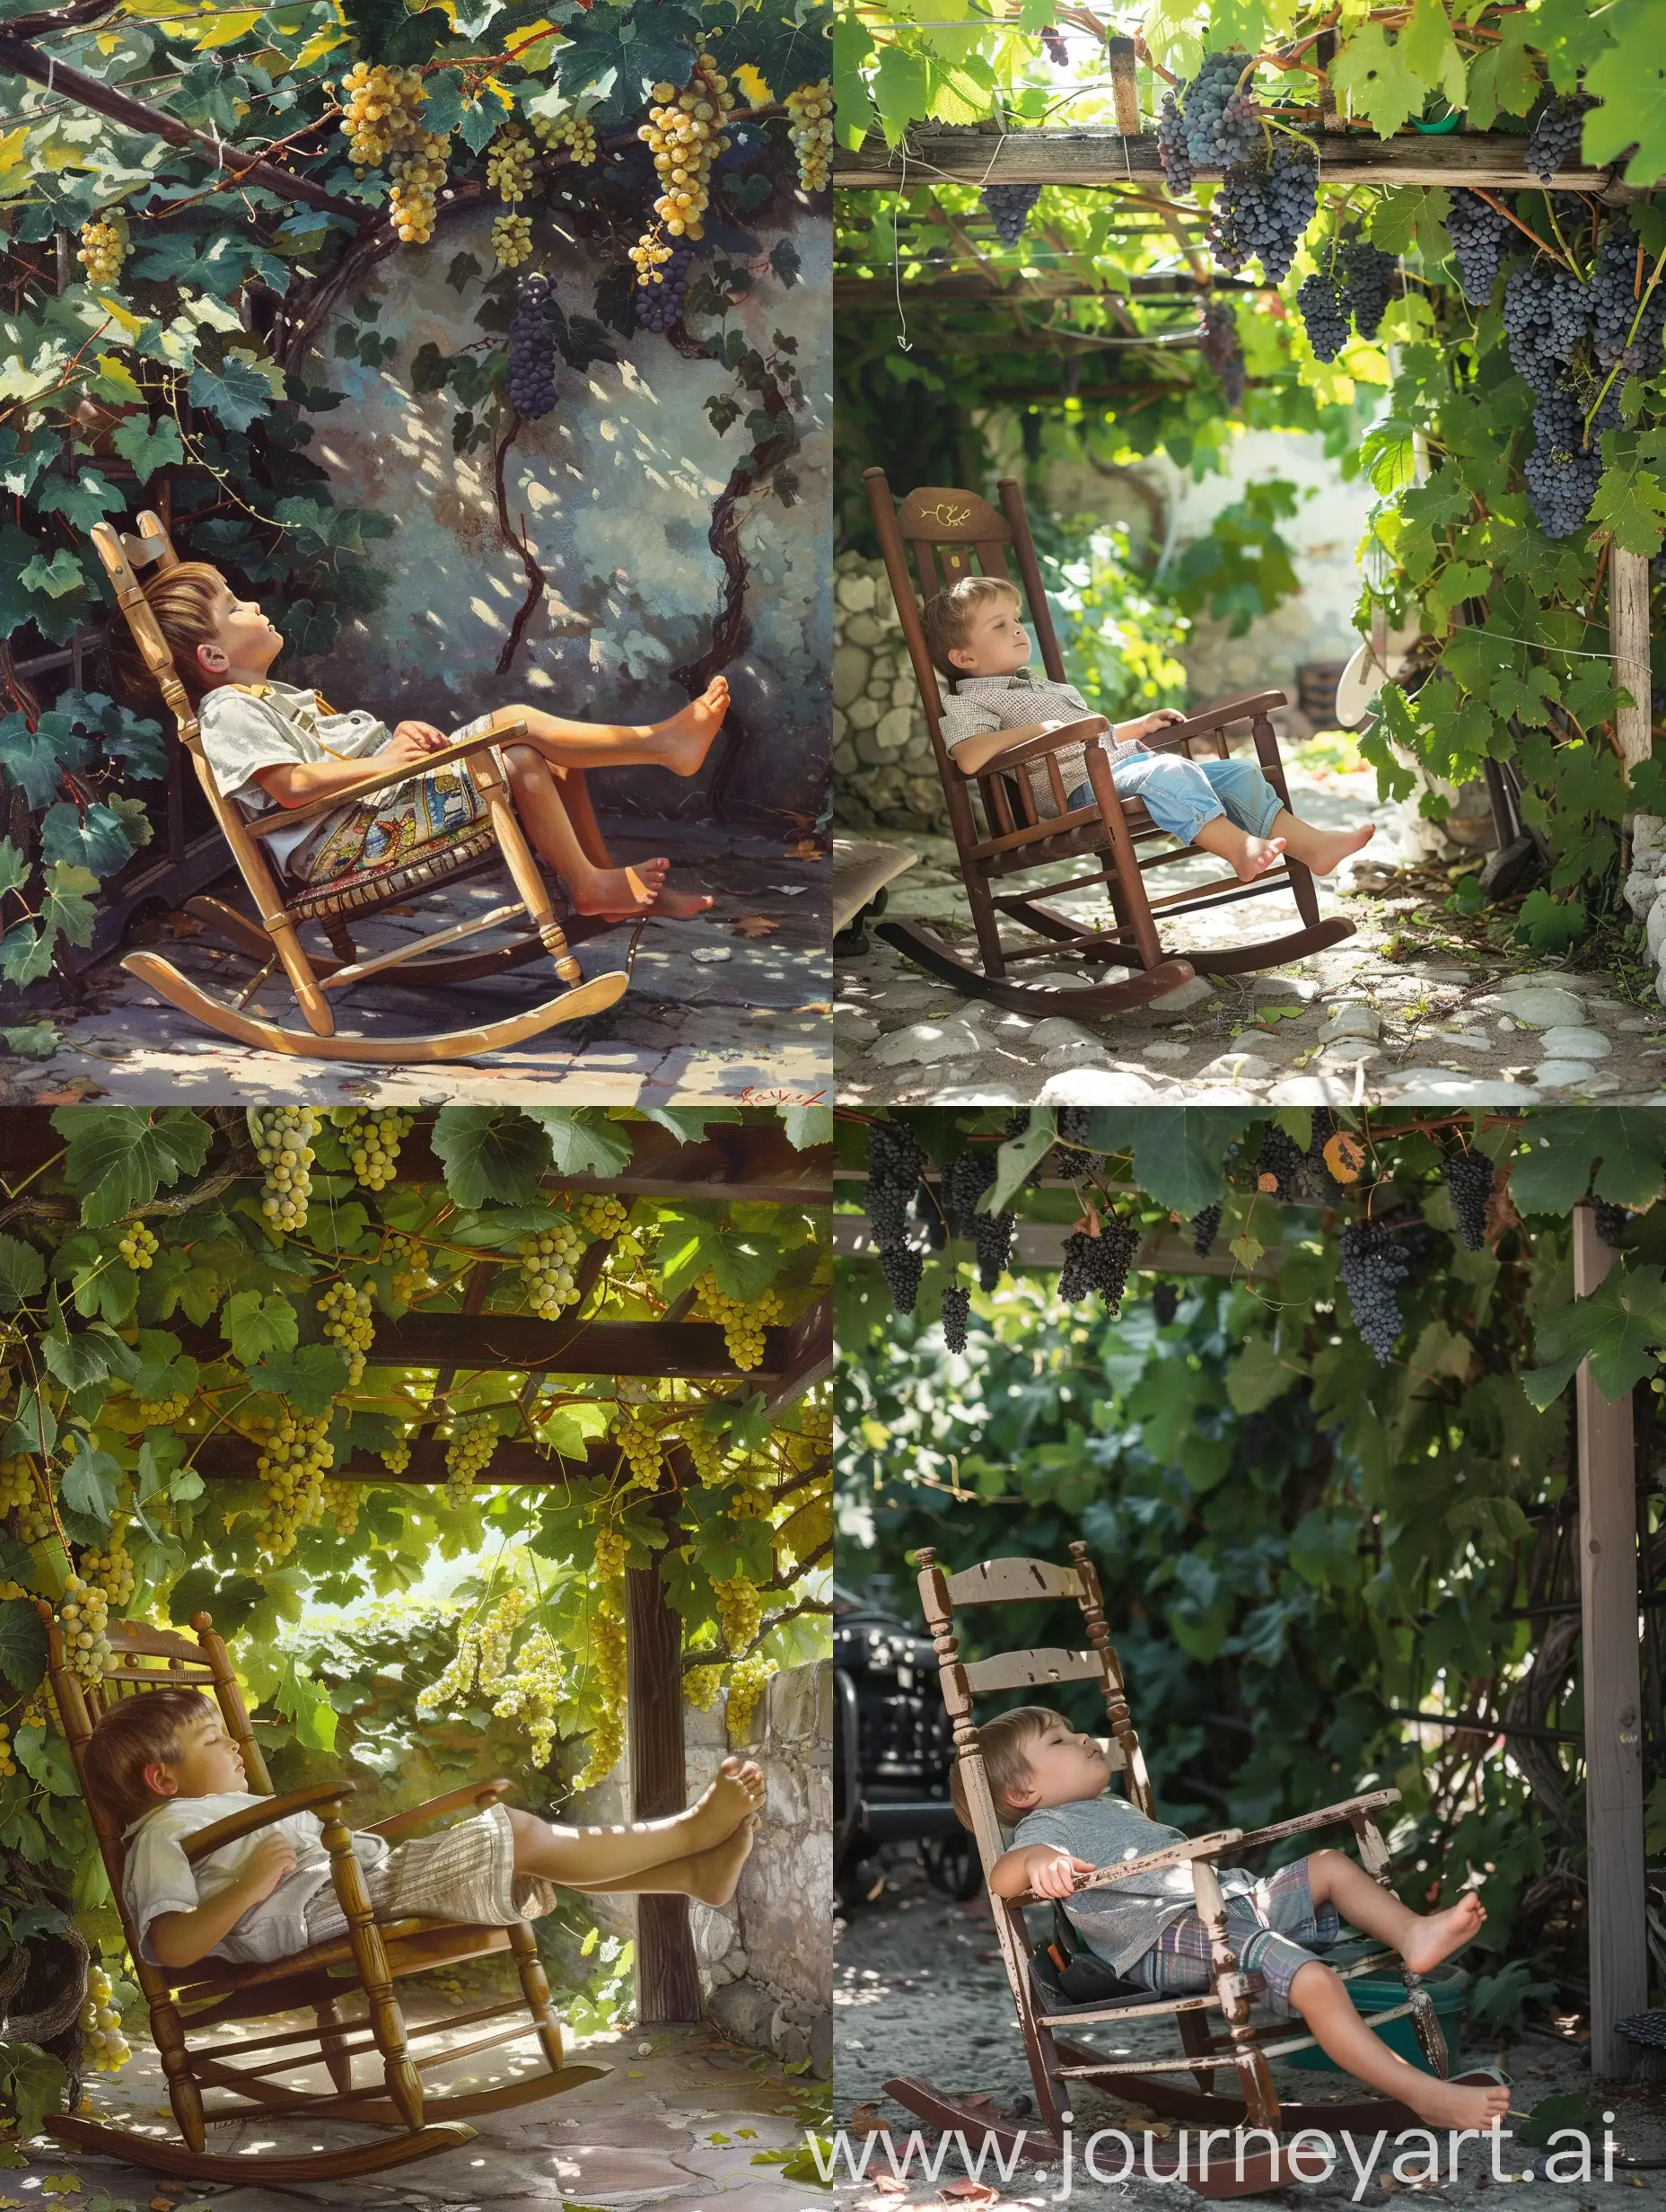 Child-Relaxing-on-Rocking-Chair-Under-Grape-Arbor